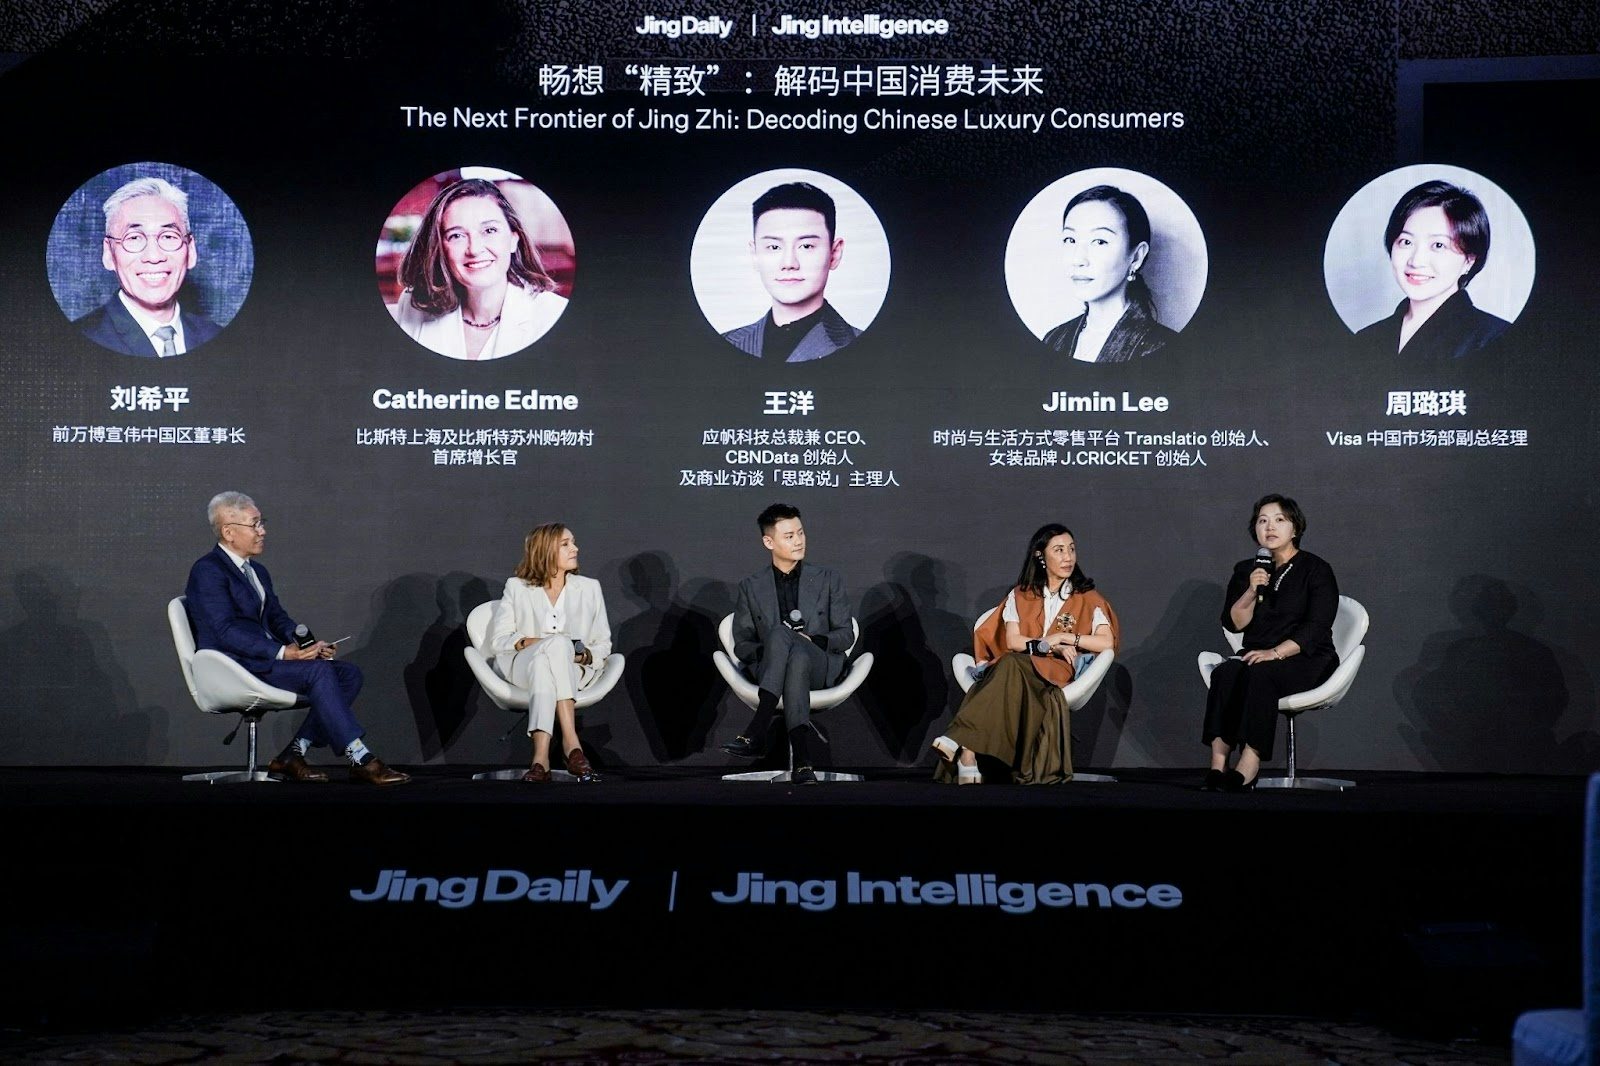 The panel discussion at Jing Daily China Luxury Summit in Shanghai explored key shifts among these new luxury consumers.
Image: Jing Daily 